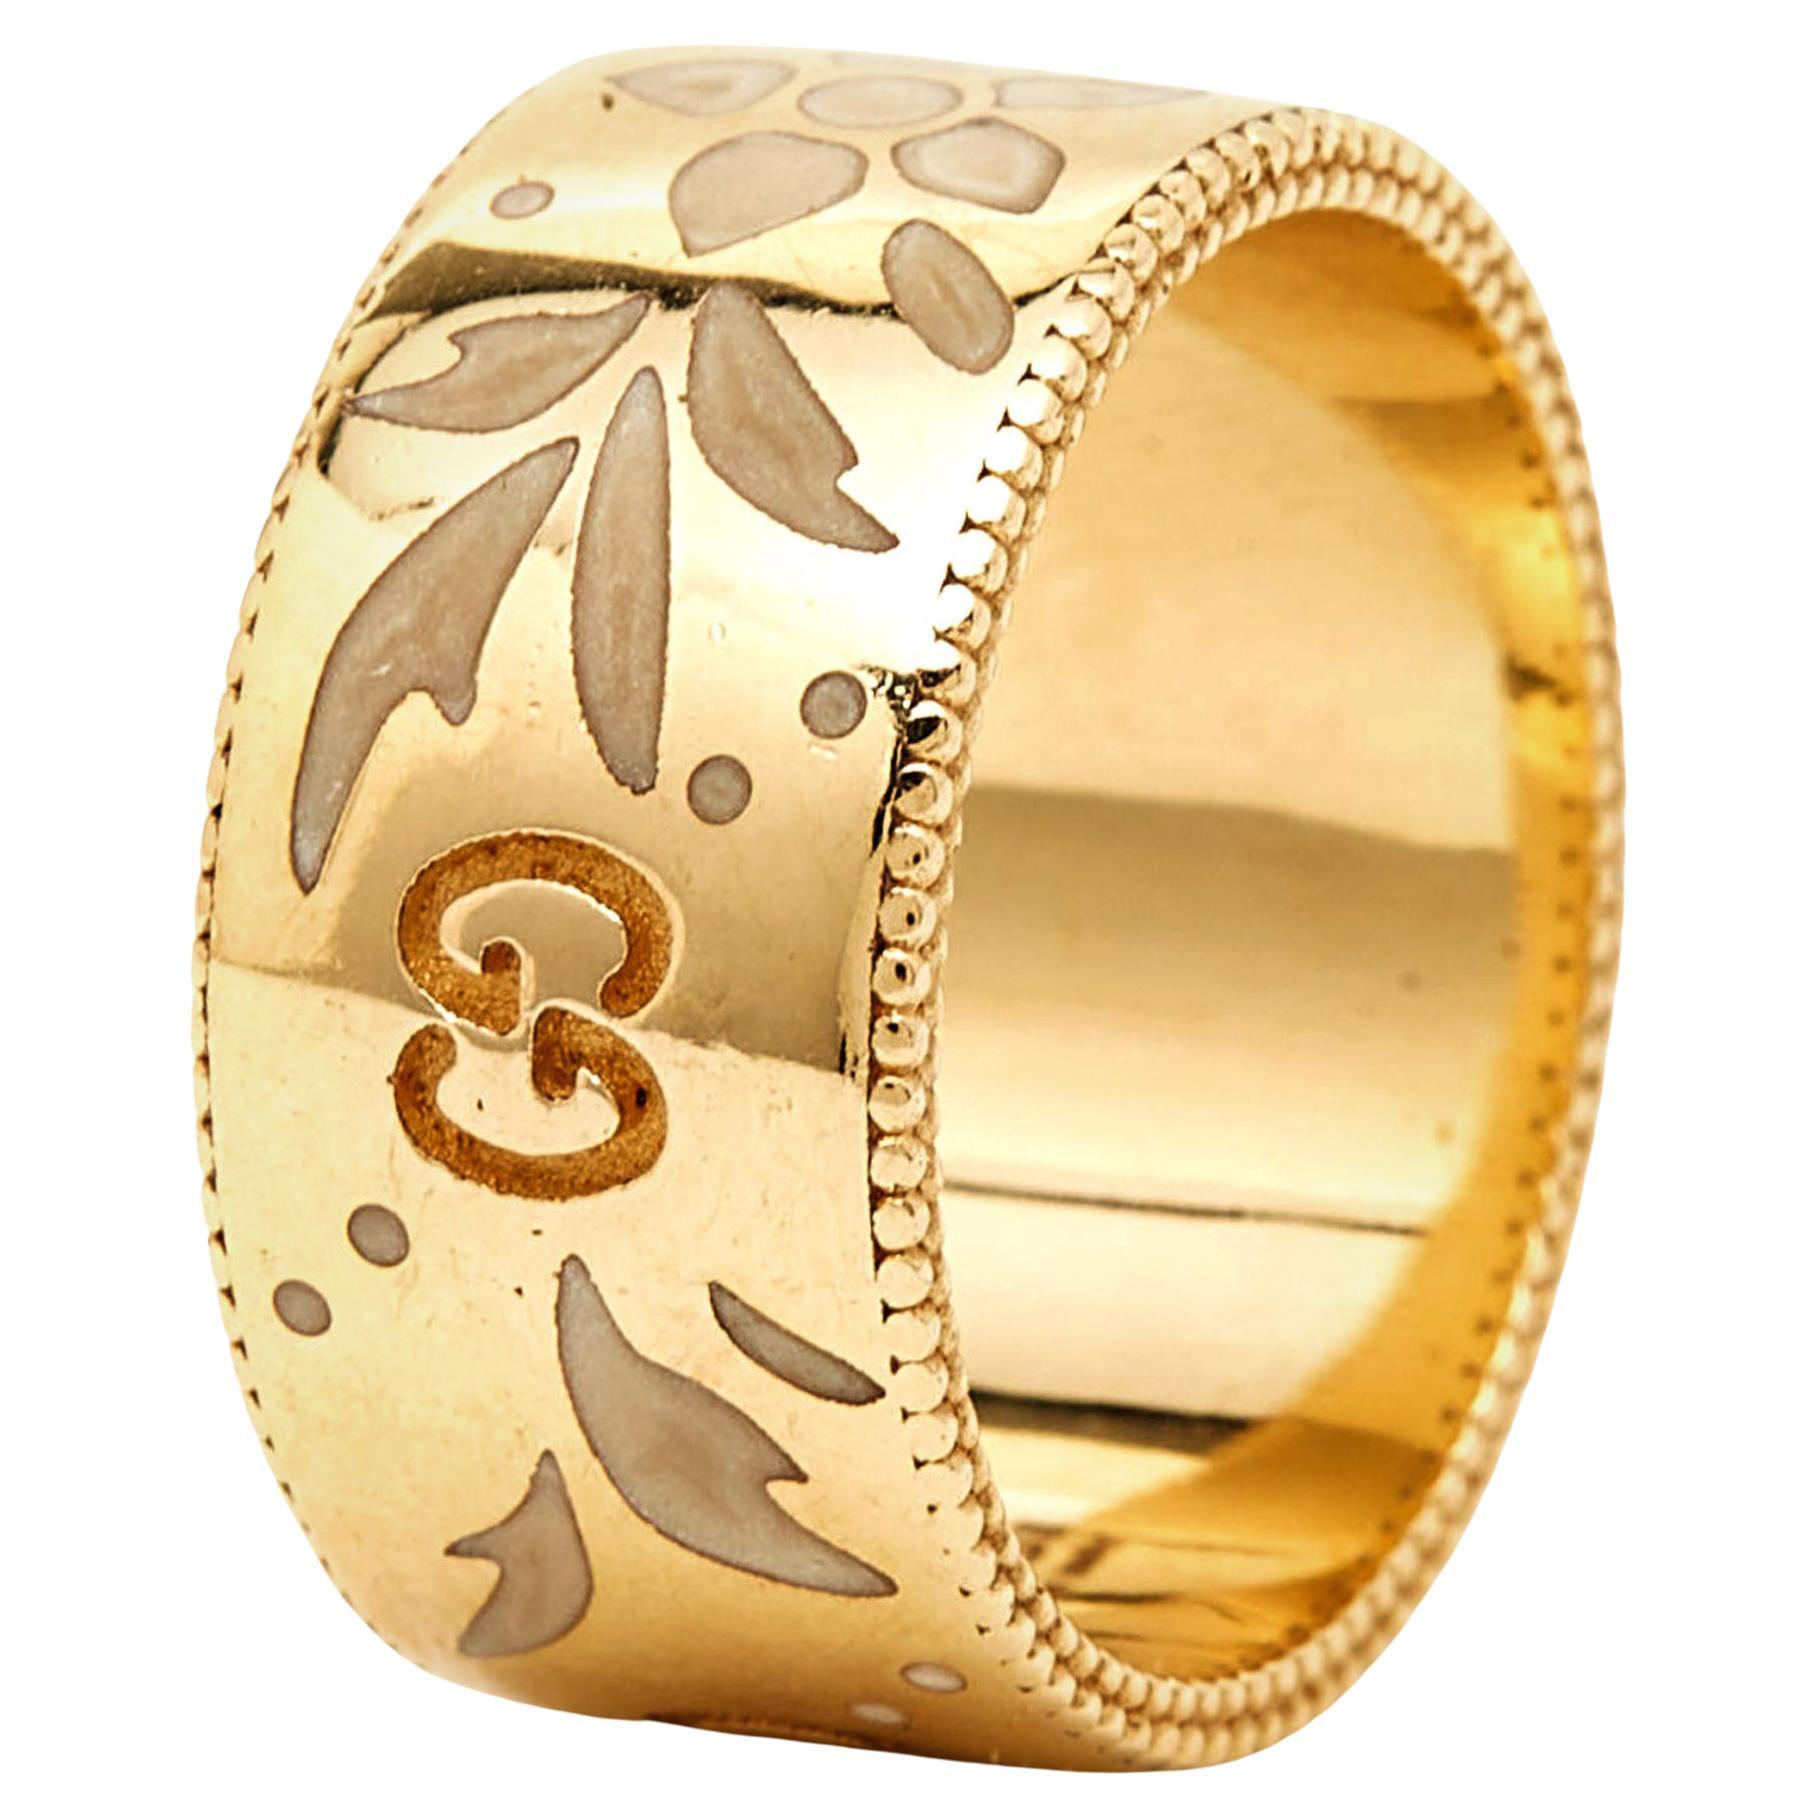 Gucci GG Icon Blossom Enamel 18k Yellow Gold Ring Size 52